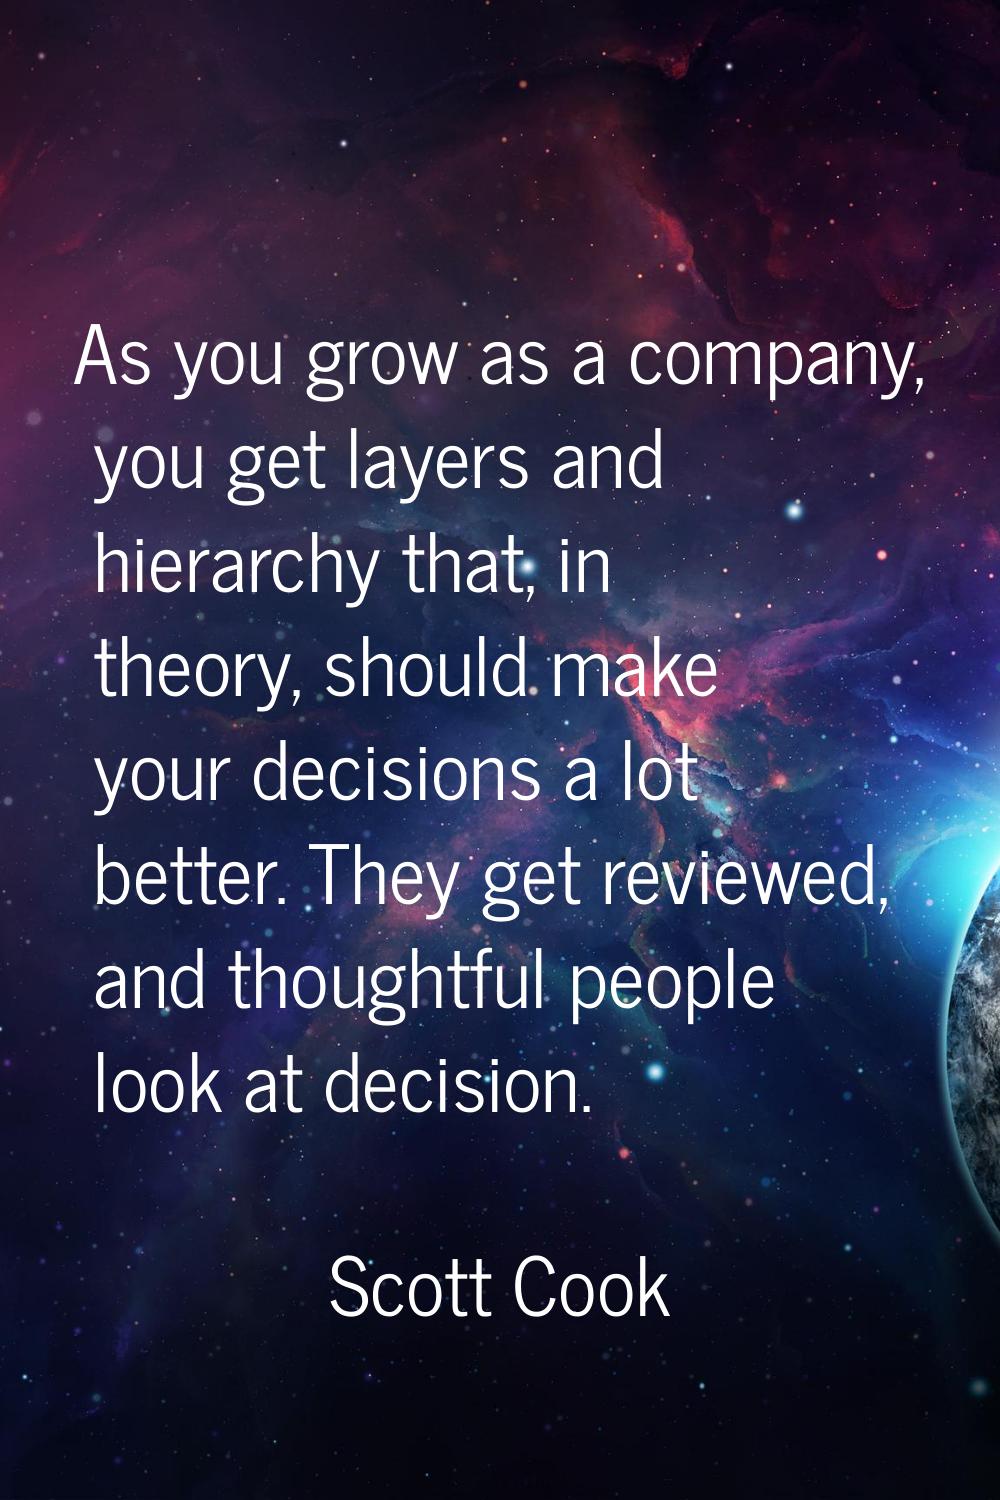 As you grow as a company, you get layers and hierarchy that, in theory, should make your decisions 